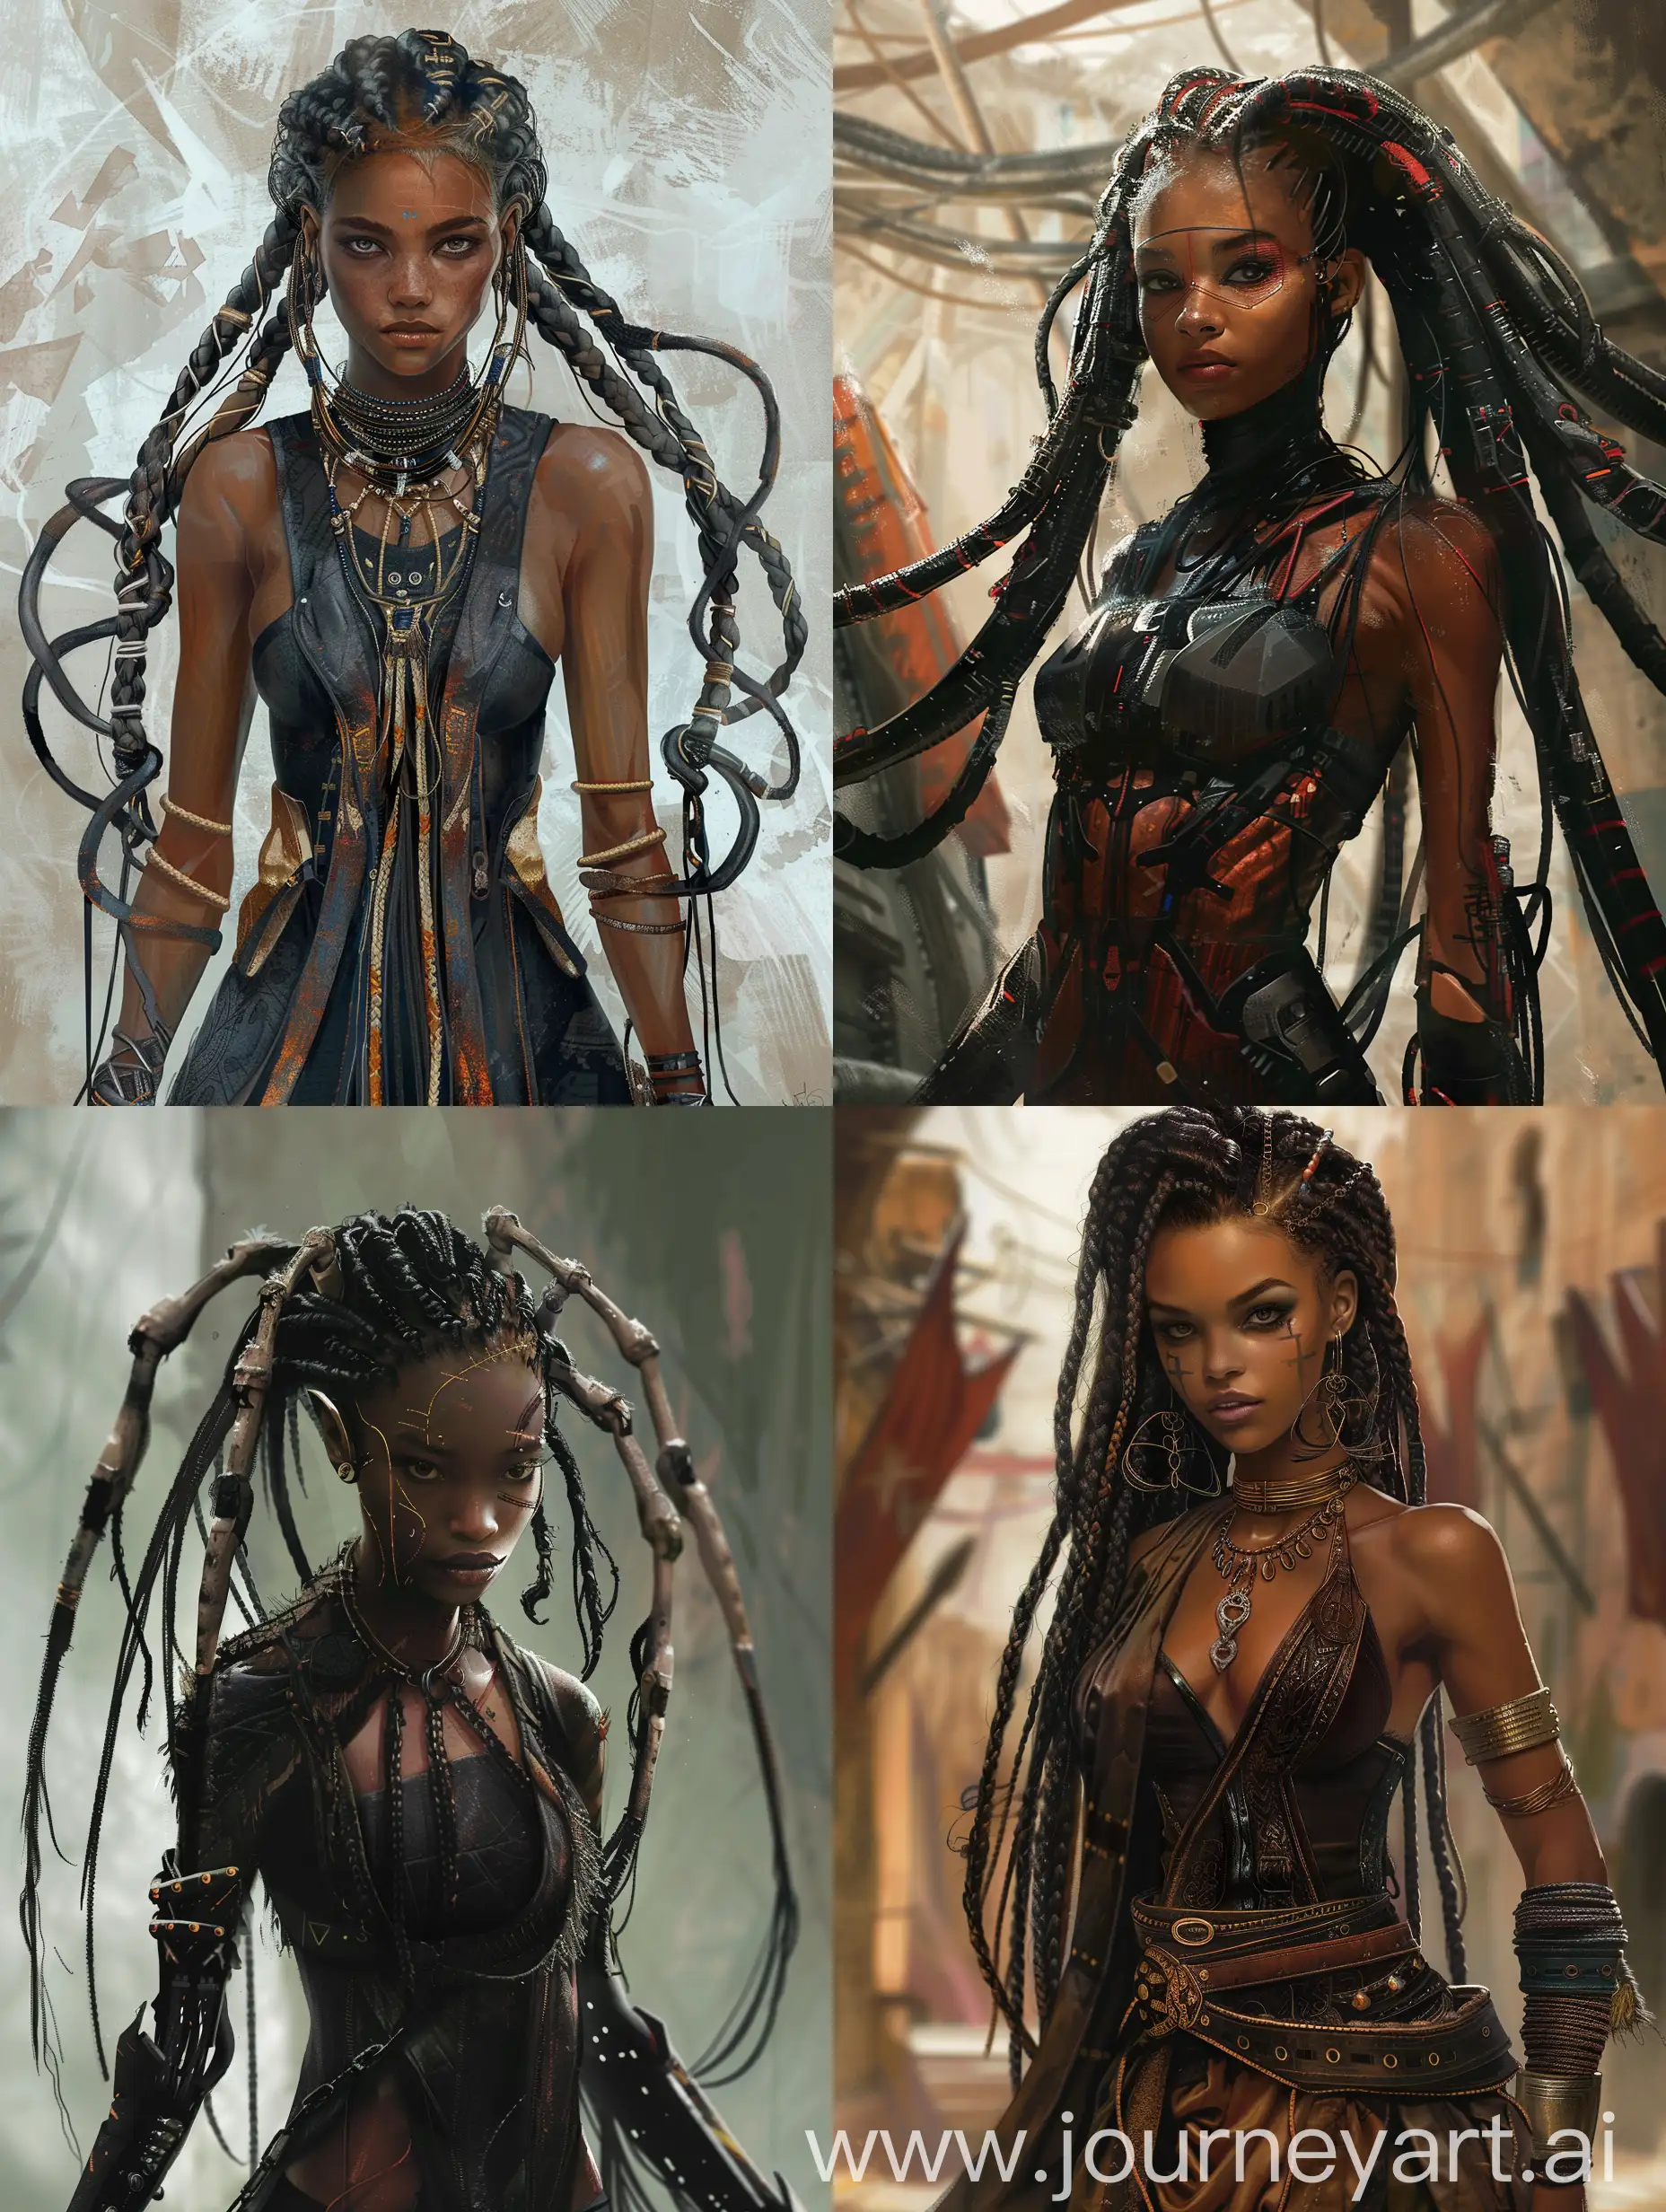 Advanced-Alien-Woman-with-Dark-Skin-and-Multiple-Arms-in-Raw-Digital-Art-Composition